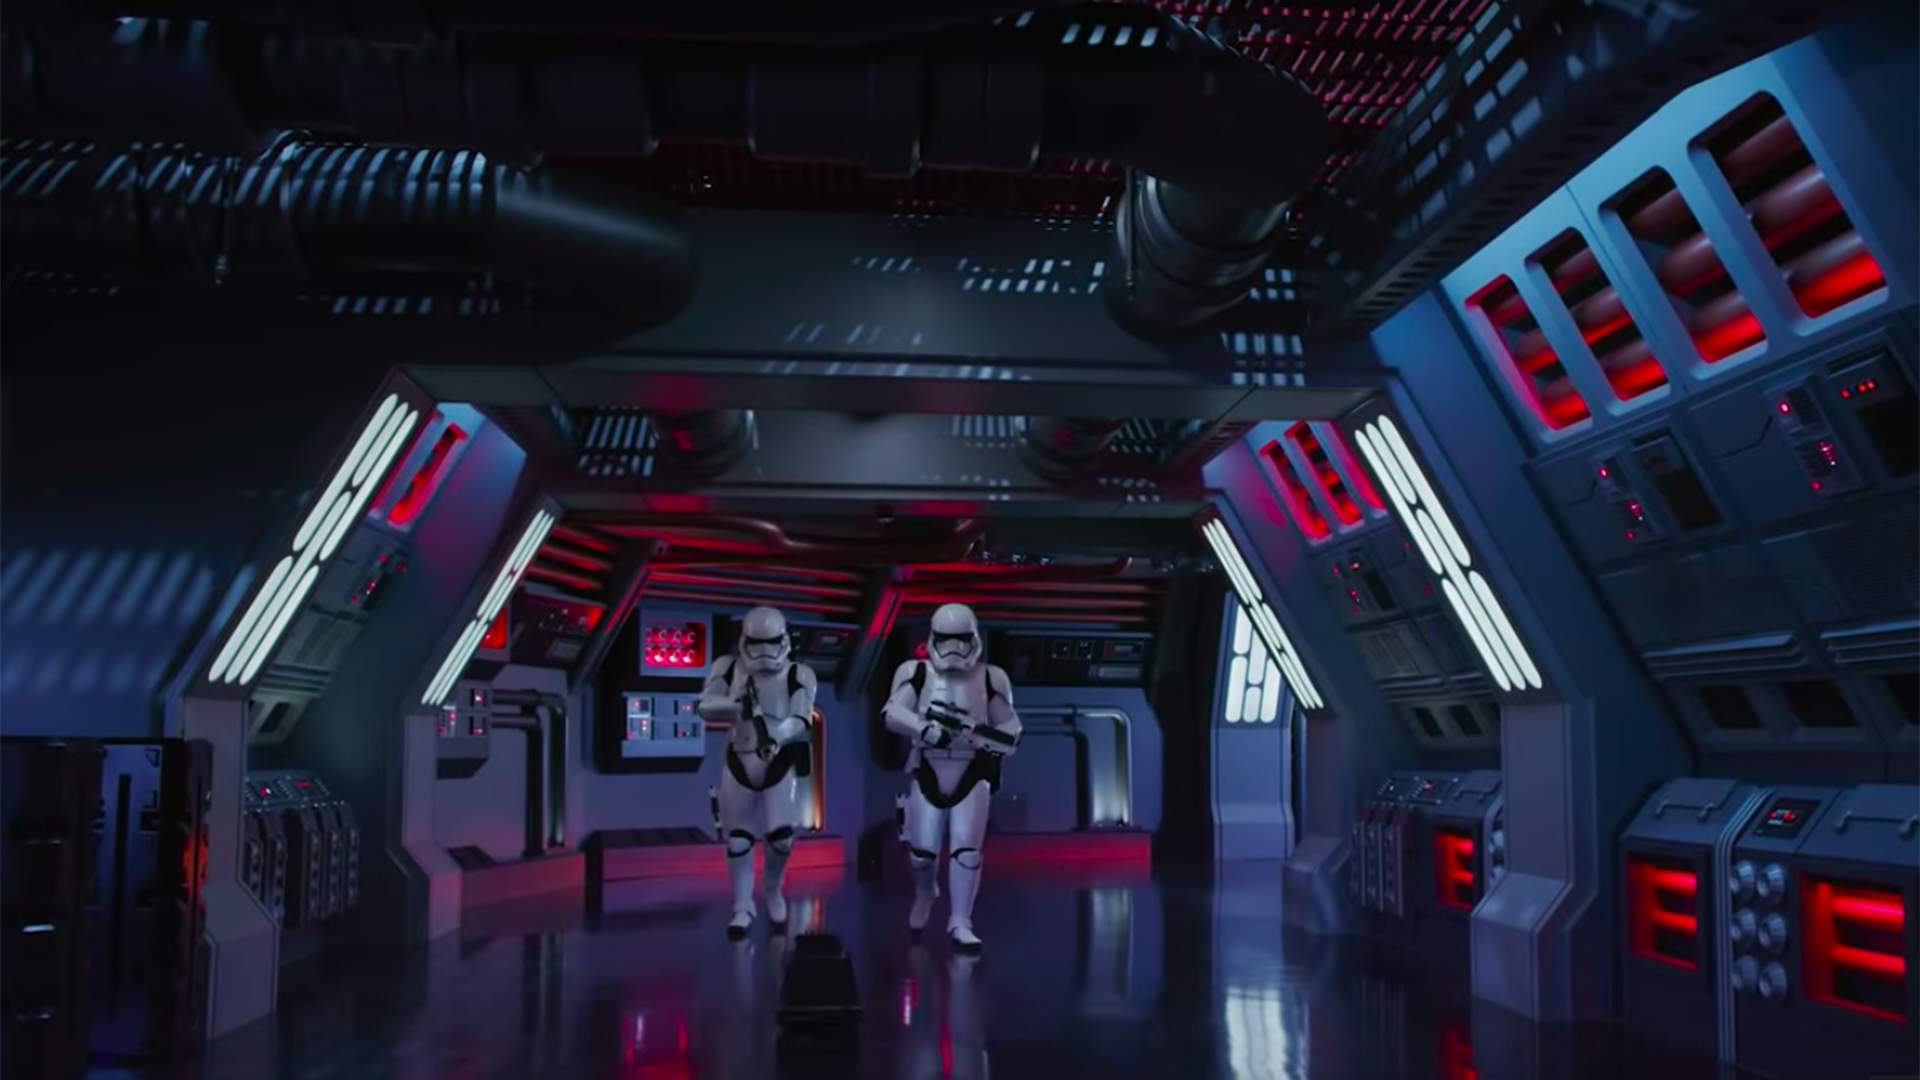 Take a Sneak Peek at the New Intergalactic Attractions Coming to Disney's 'Star Wars' Theme Parks